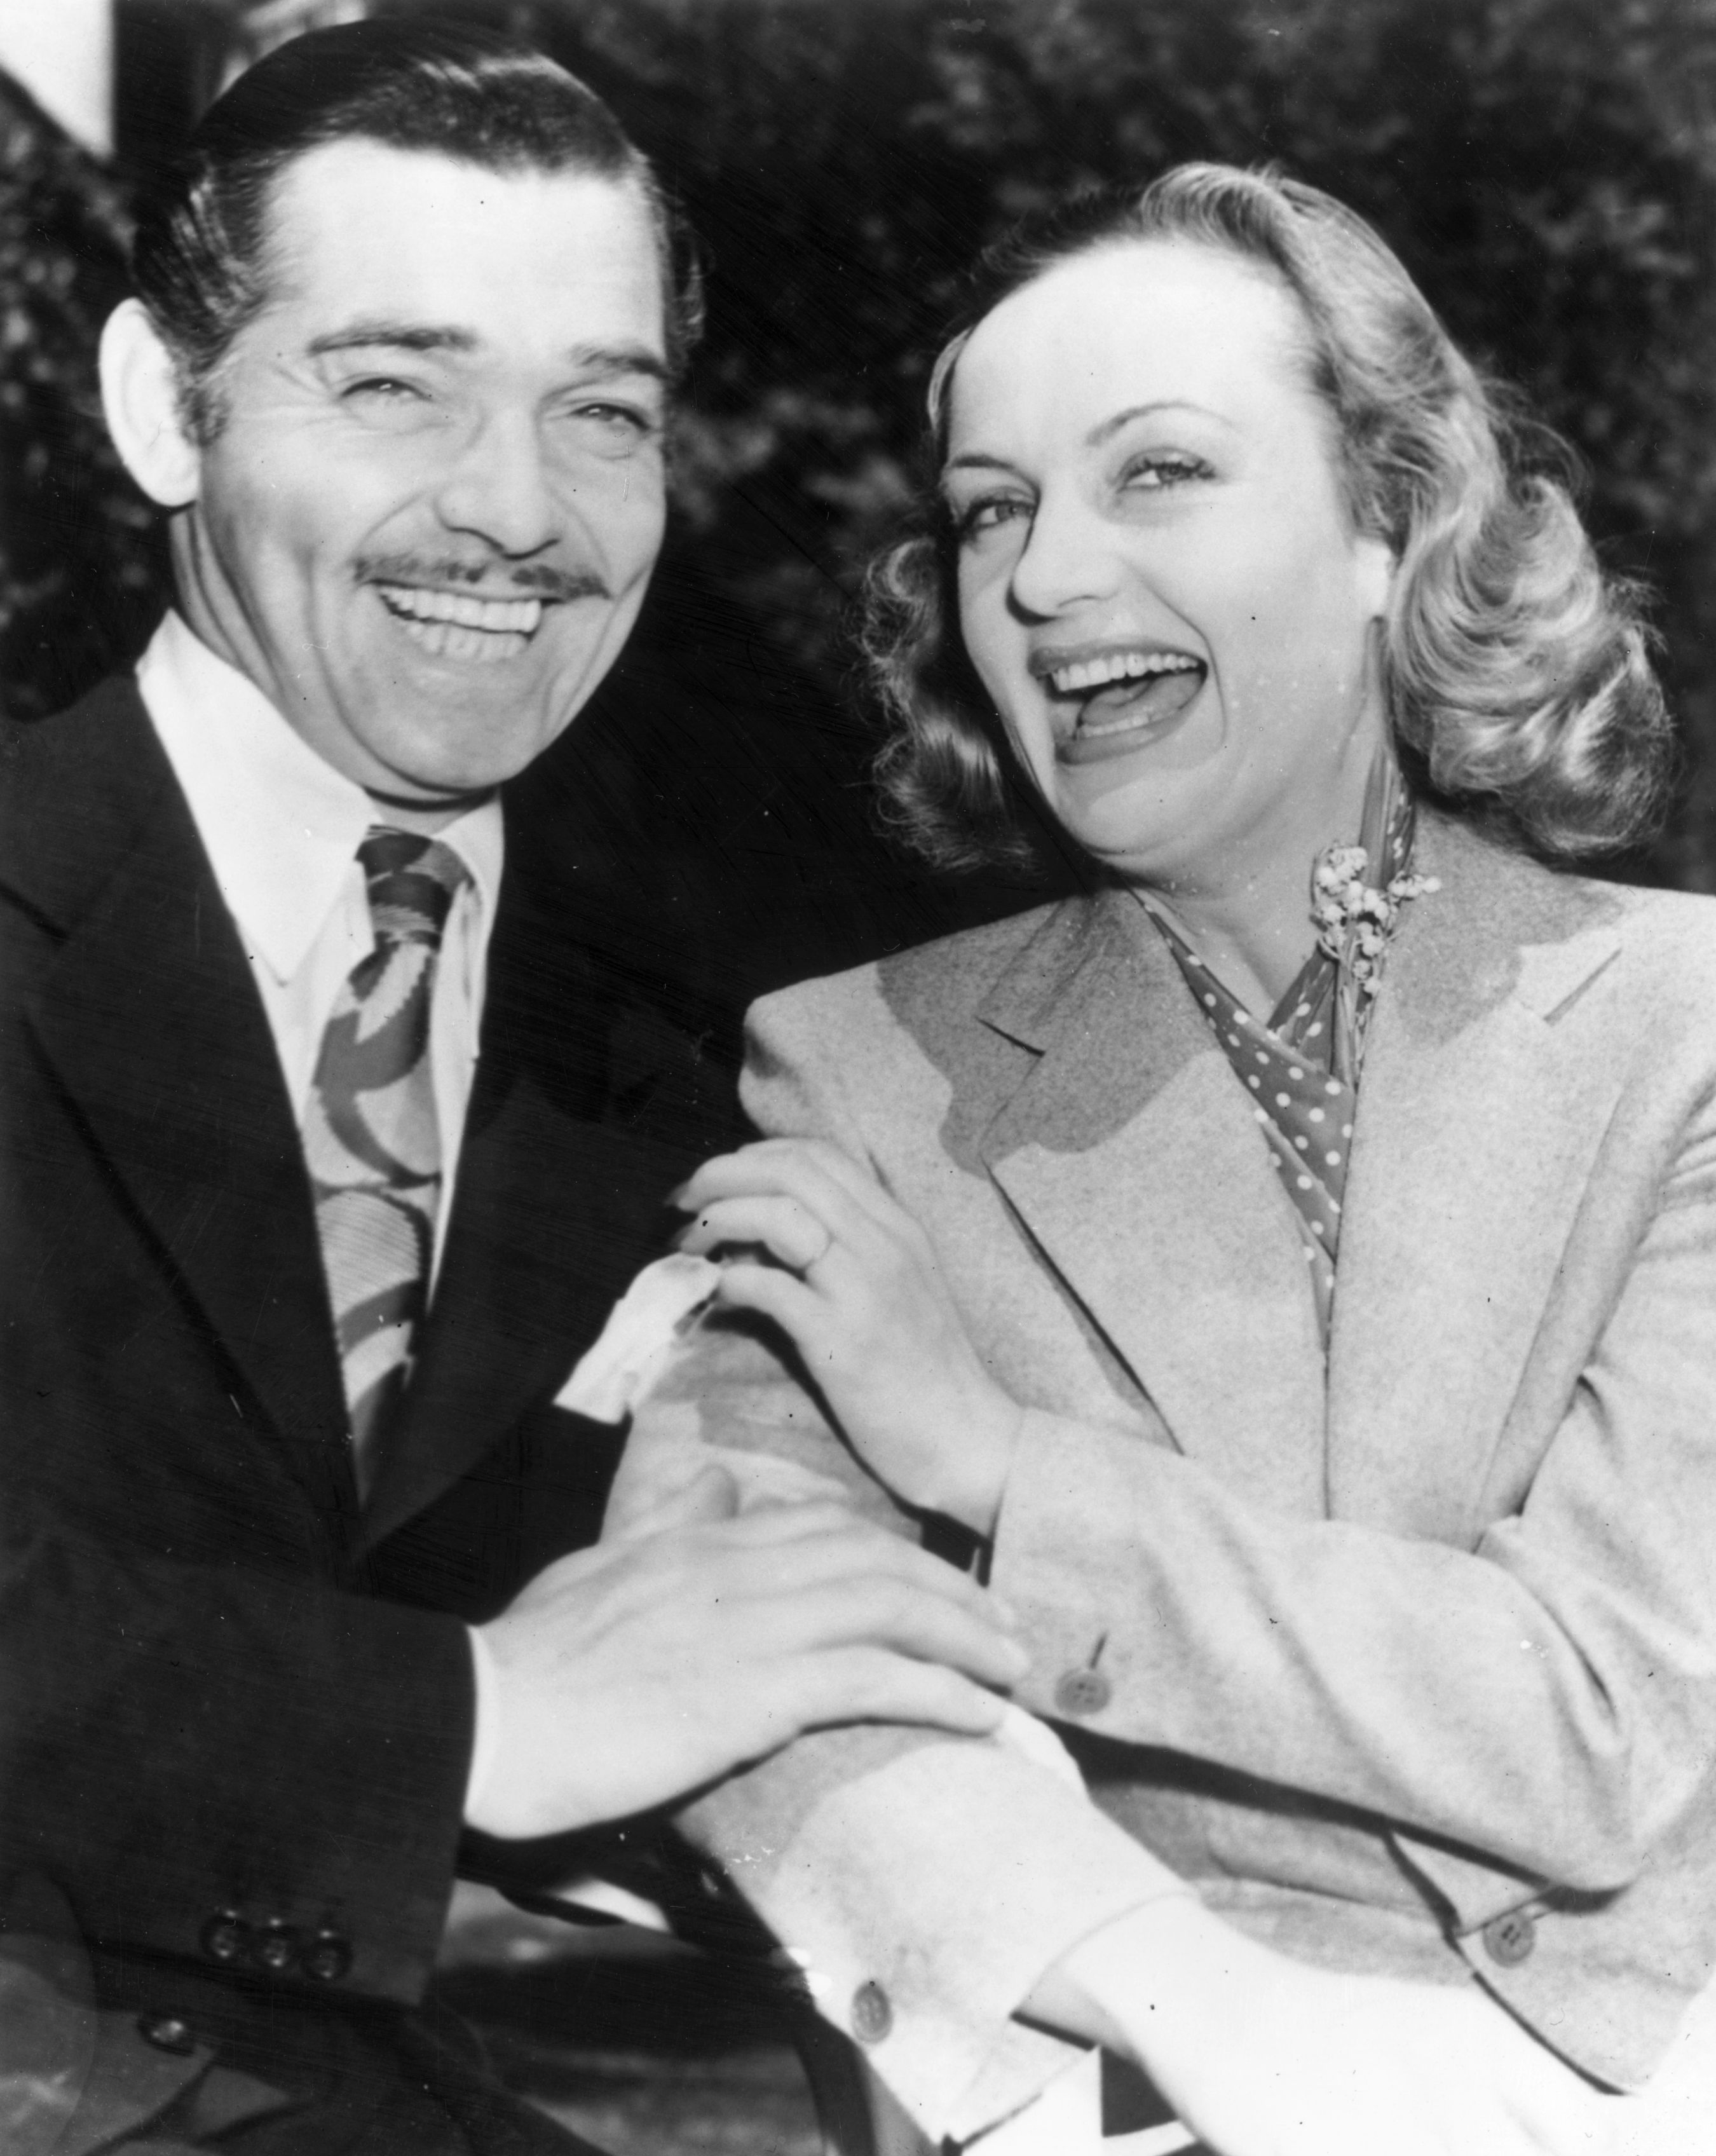 Clark Gable with his wife Carole Lombard after eloping in 1939. | Source: Getty Images